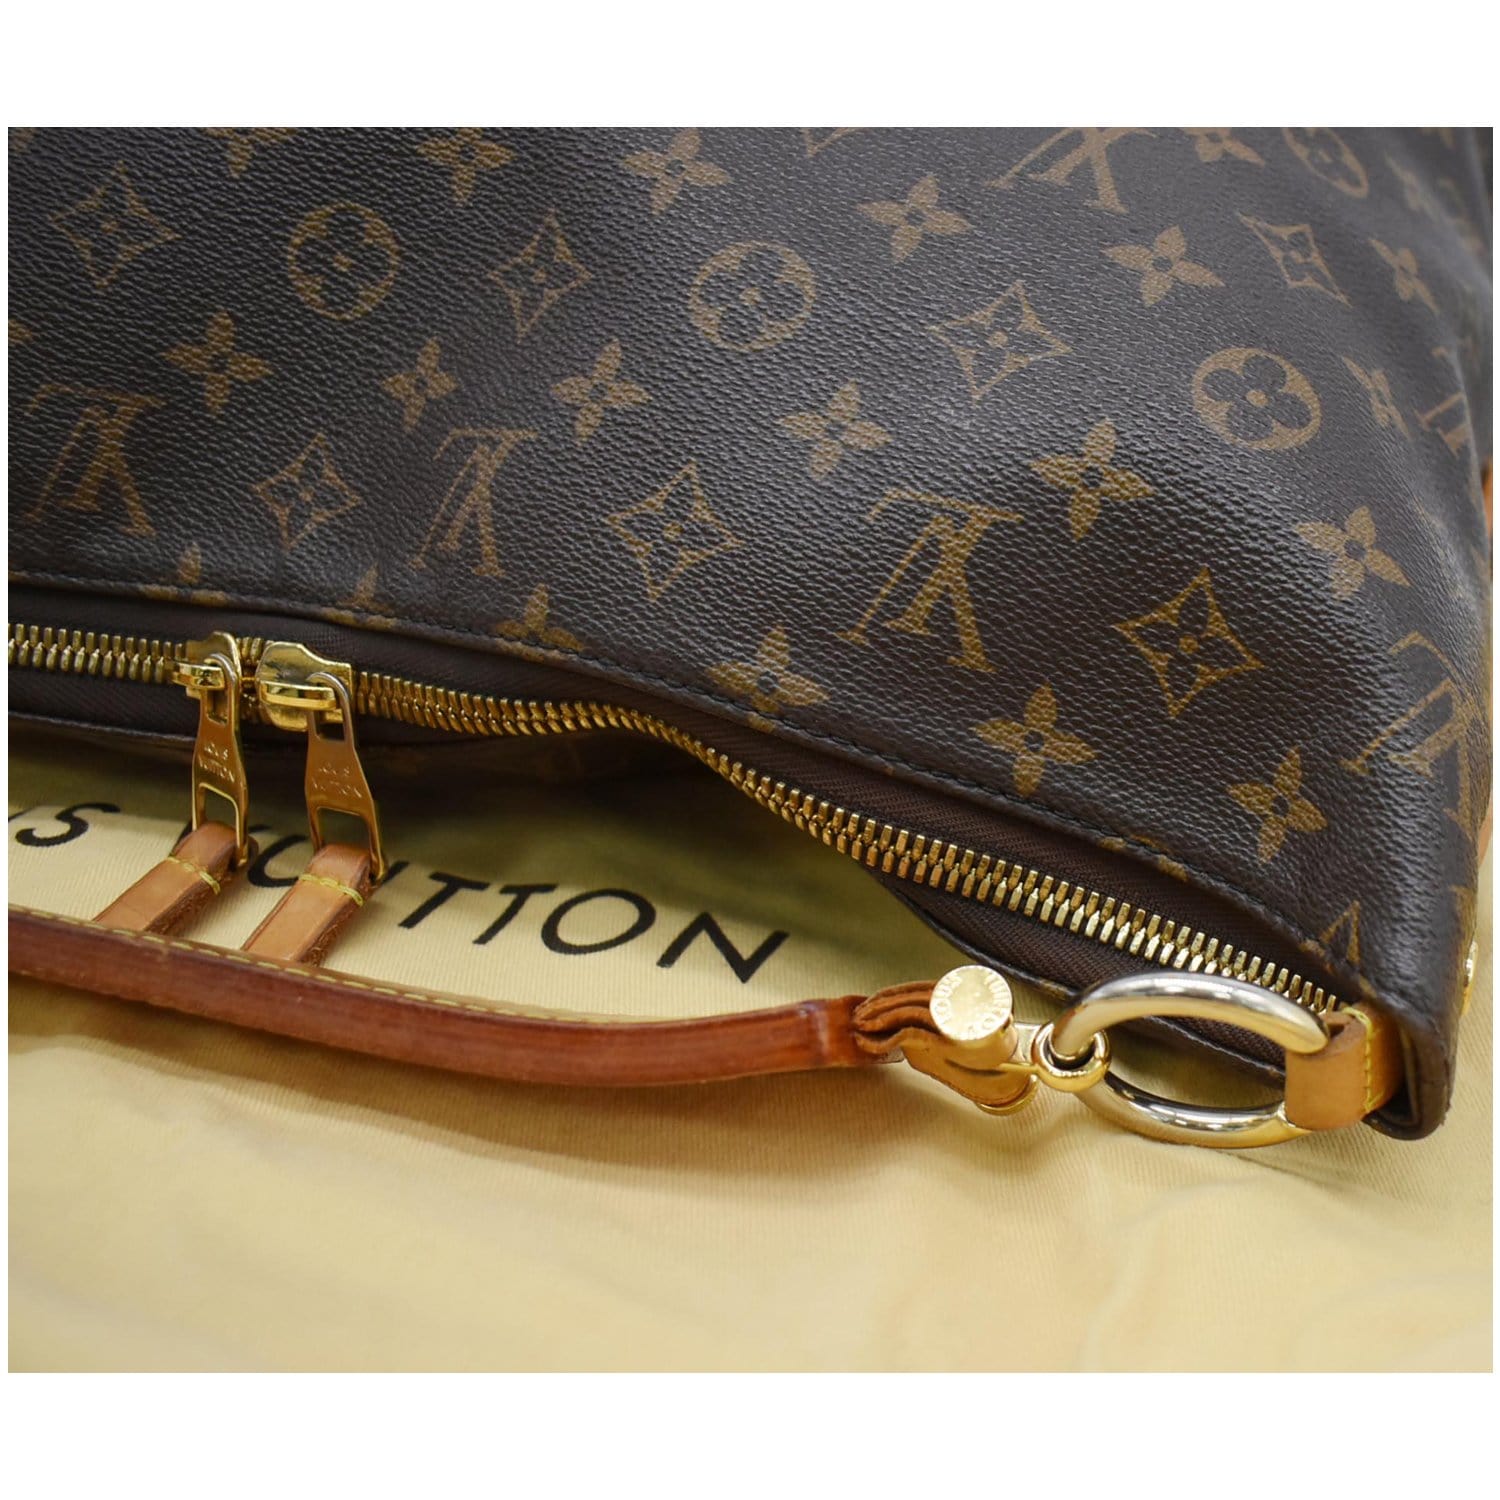 Preloved Louis Vuitton Monogram Canvas Sully MM Bag Excellent condition